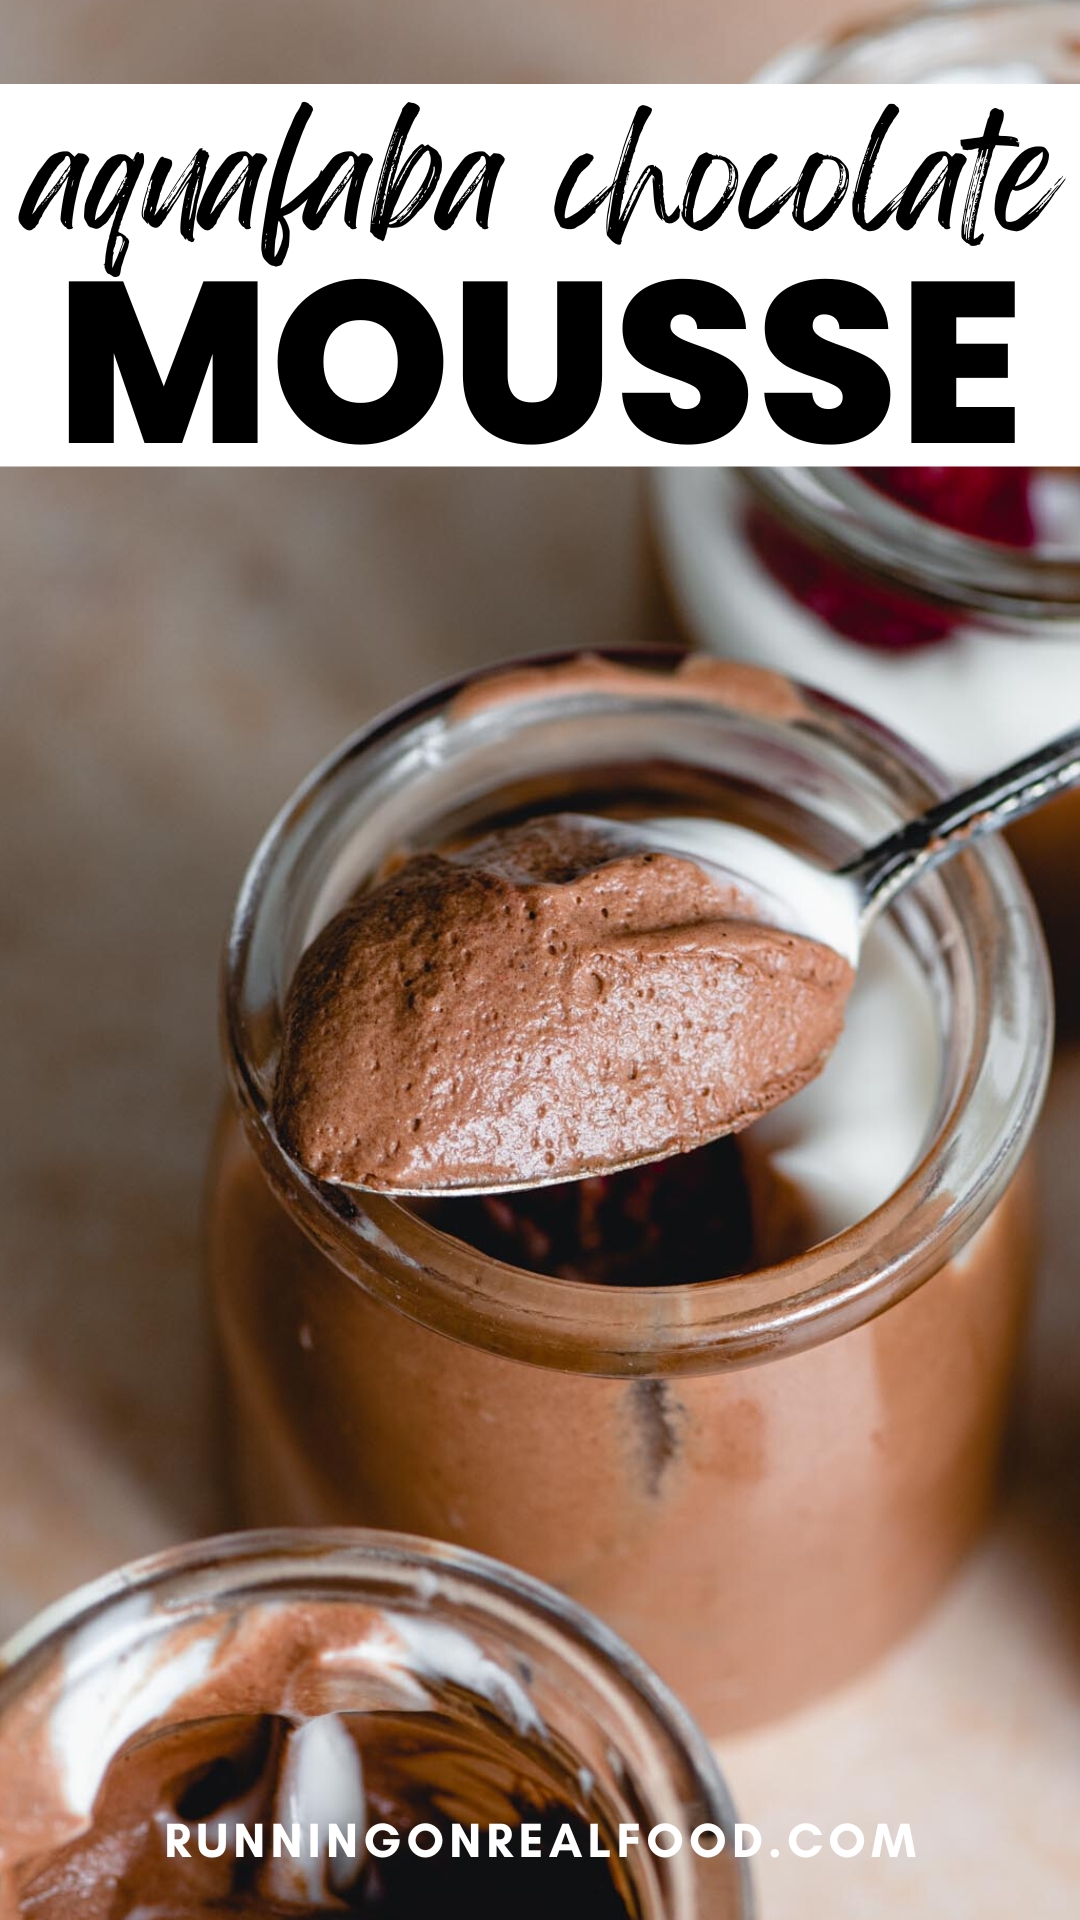 Pinterest graphic for aquafaba chocolate mousse with an image of the mousse in jars and a stylized text title.